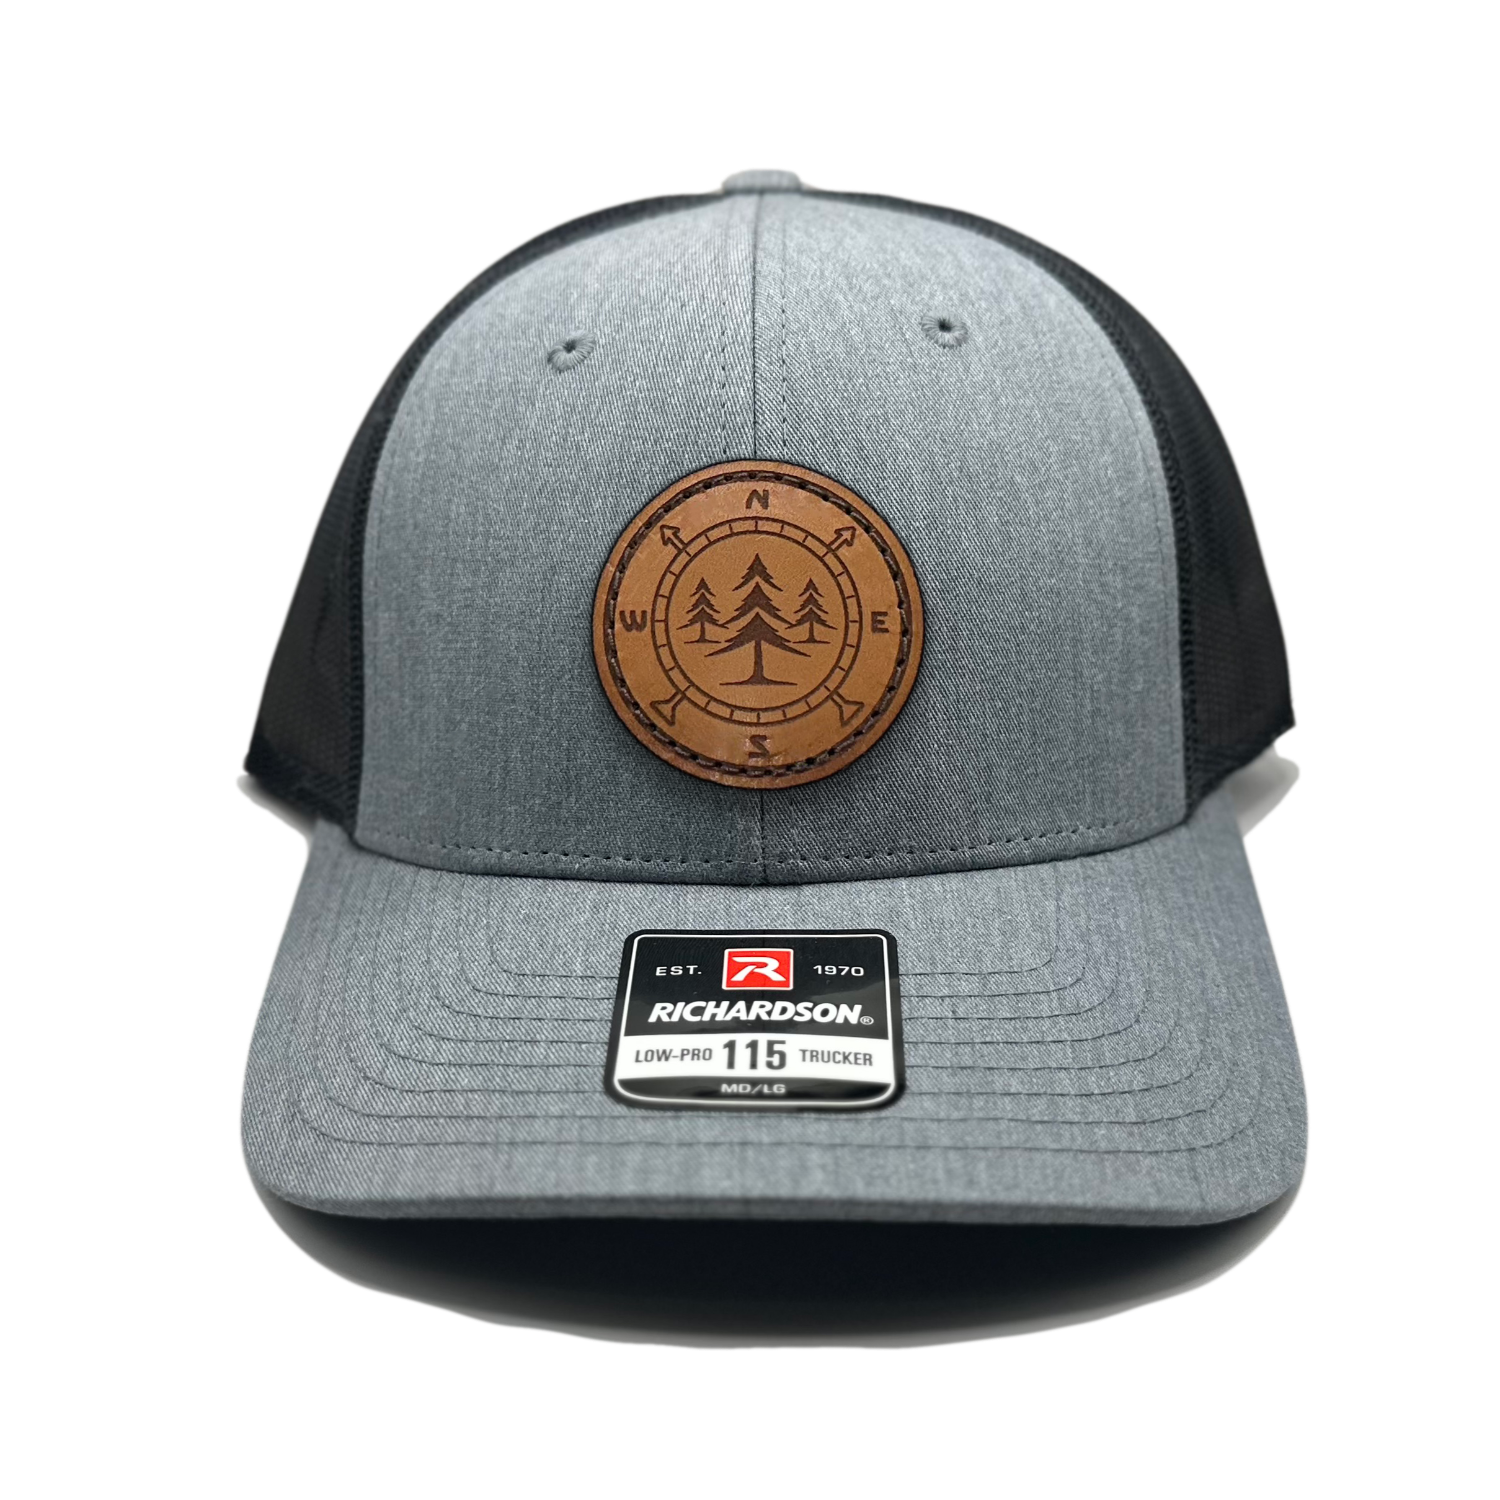 A high-quality leather patch hat named Lost Pines, showcasing a distinctive compass and pine trees design on a circular leather patch. Made in the USA, this hat features genuine leather craftsmanship and is affixed to a Heather grey/charcoal Richardson 115 low profile SnapBack hat. Available in small and m/l sizes and various colors, this unique hat is inspired by the picturesque mountains of Colorado. Perfect for hat enthusiasts and those seeking stylish leather patch designs.